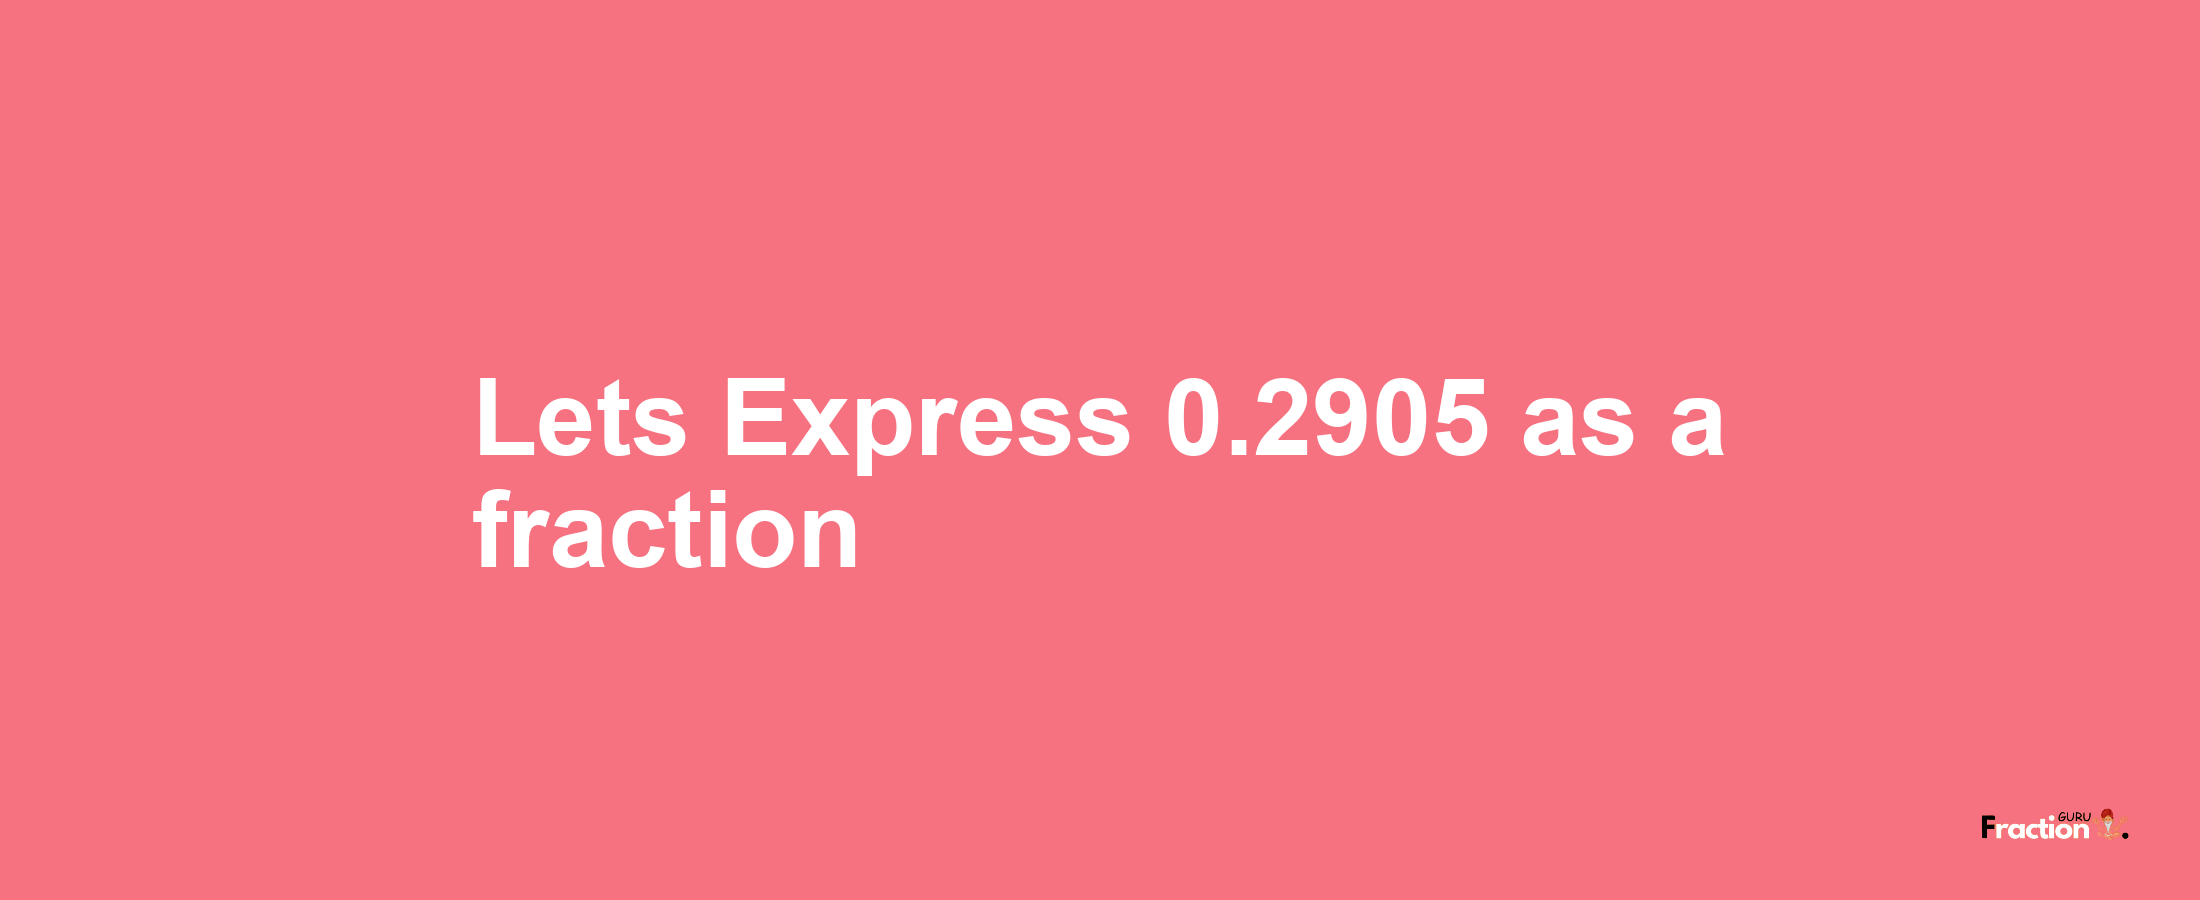 Lets Express 0.2905 as afraction